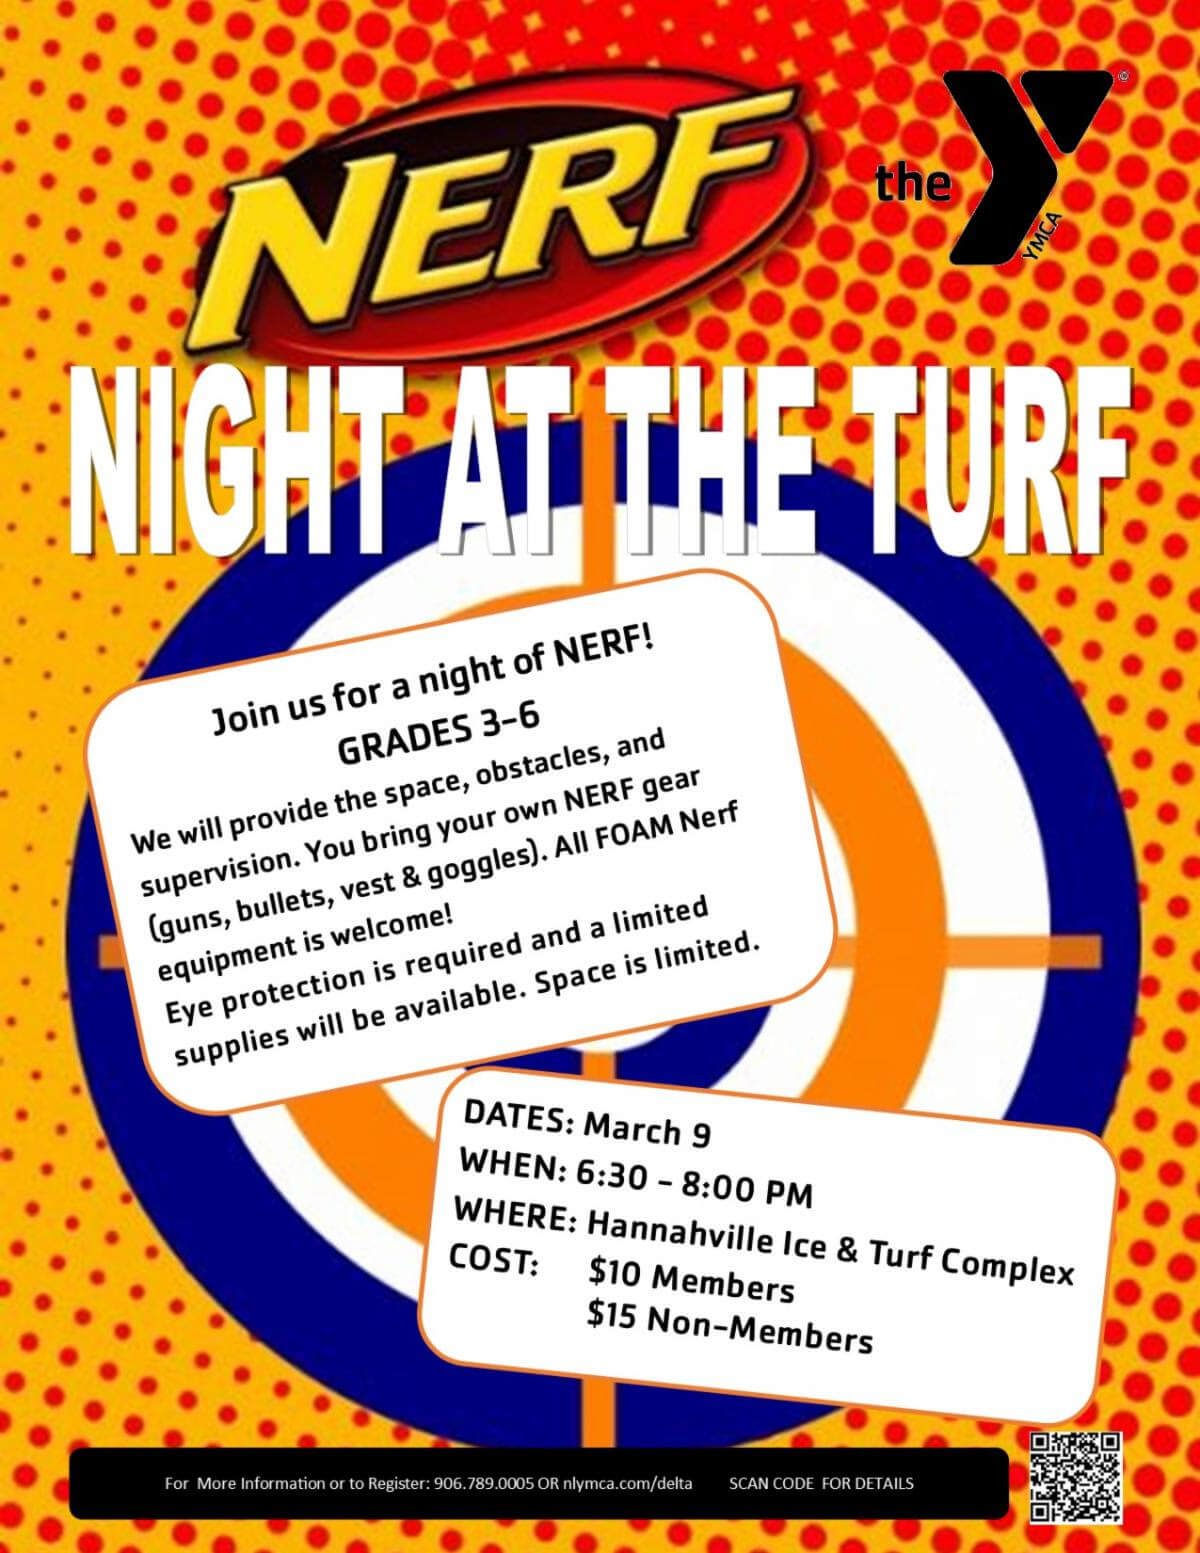 The Y-Nerf Night at the Turf. Join us for a night of NERF! Grades 3-6. We will provide the space, obstacles, and supervision. You bring you own Nerf gear (guns, bullets, vest & goggles). All FOAM Nerf equipment is welcome! Eye protection is required and a limited supplies will be available. Space is limited. Date: March 9th. When: 6:30-8:00 PM. Where: Hannahville Ice & Turf Complex. Cost: $10 Members $15 Non-Members.